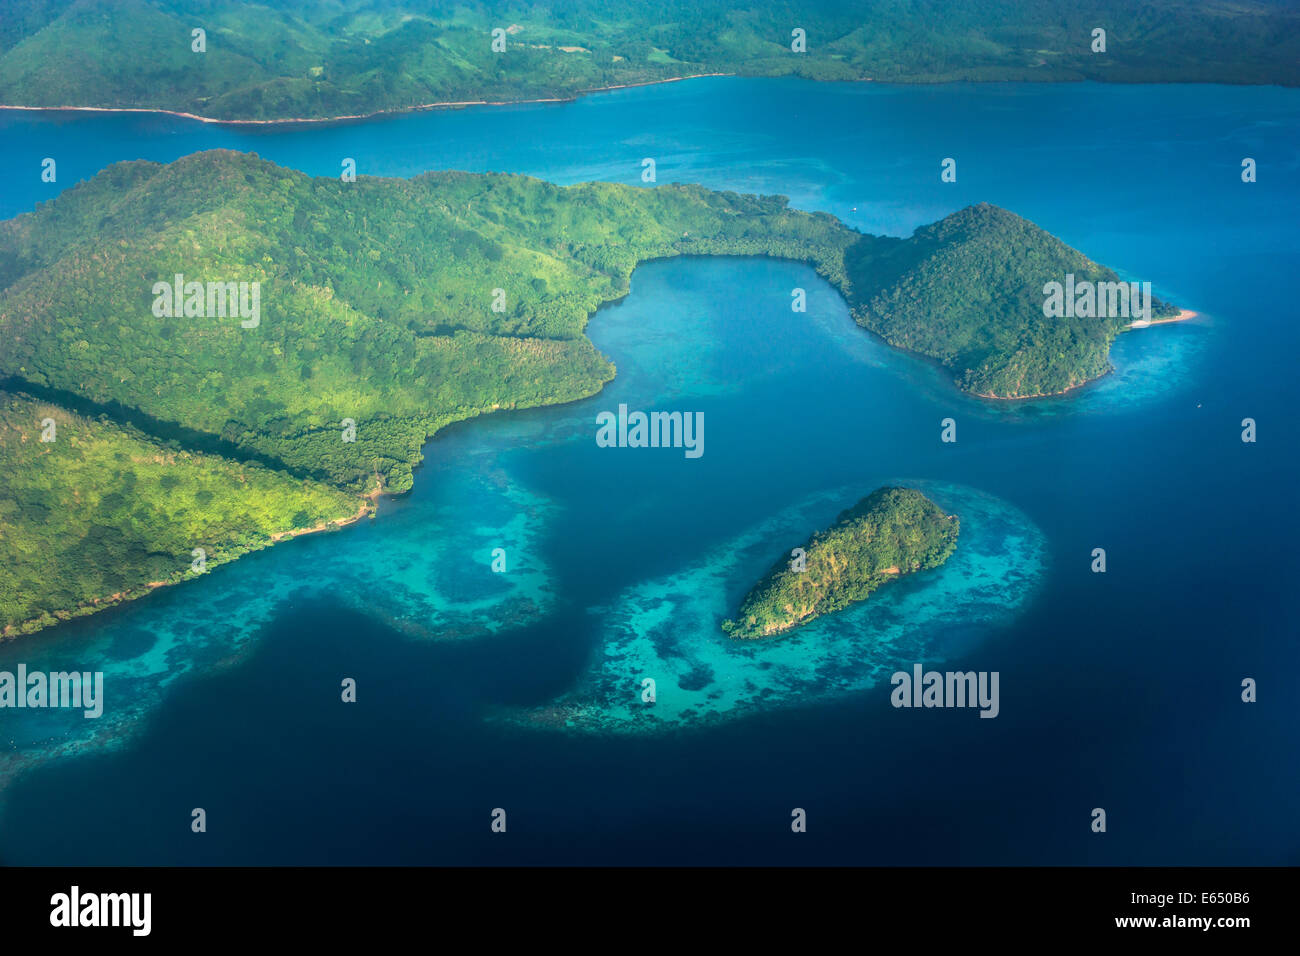 Coastal landscape with coral reefs, Busuanga Island, Philippines Stock Photo